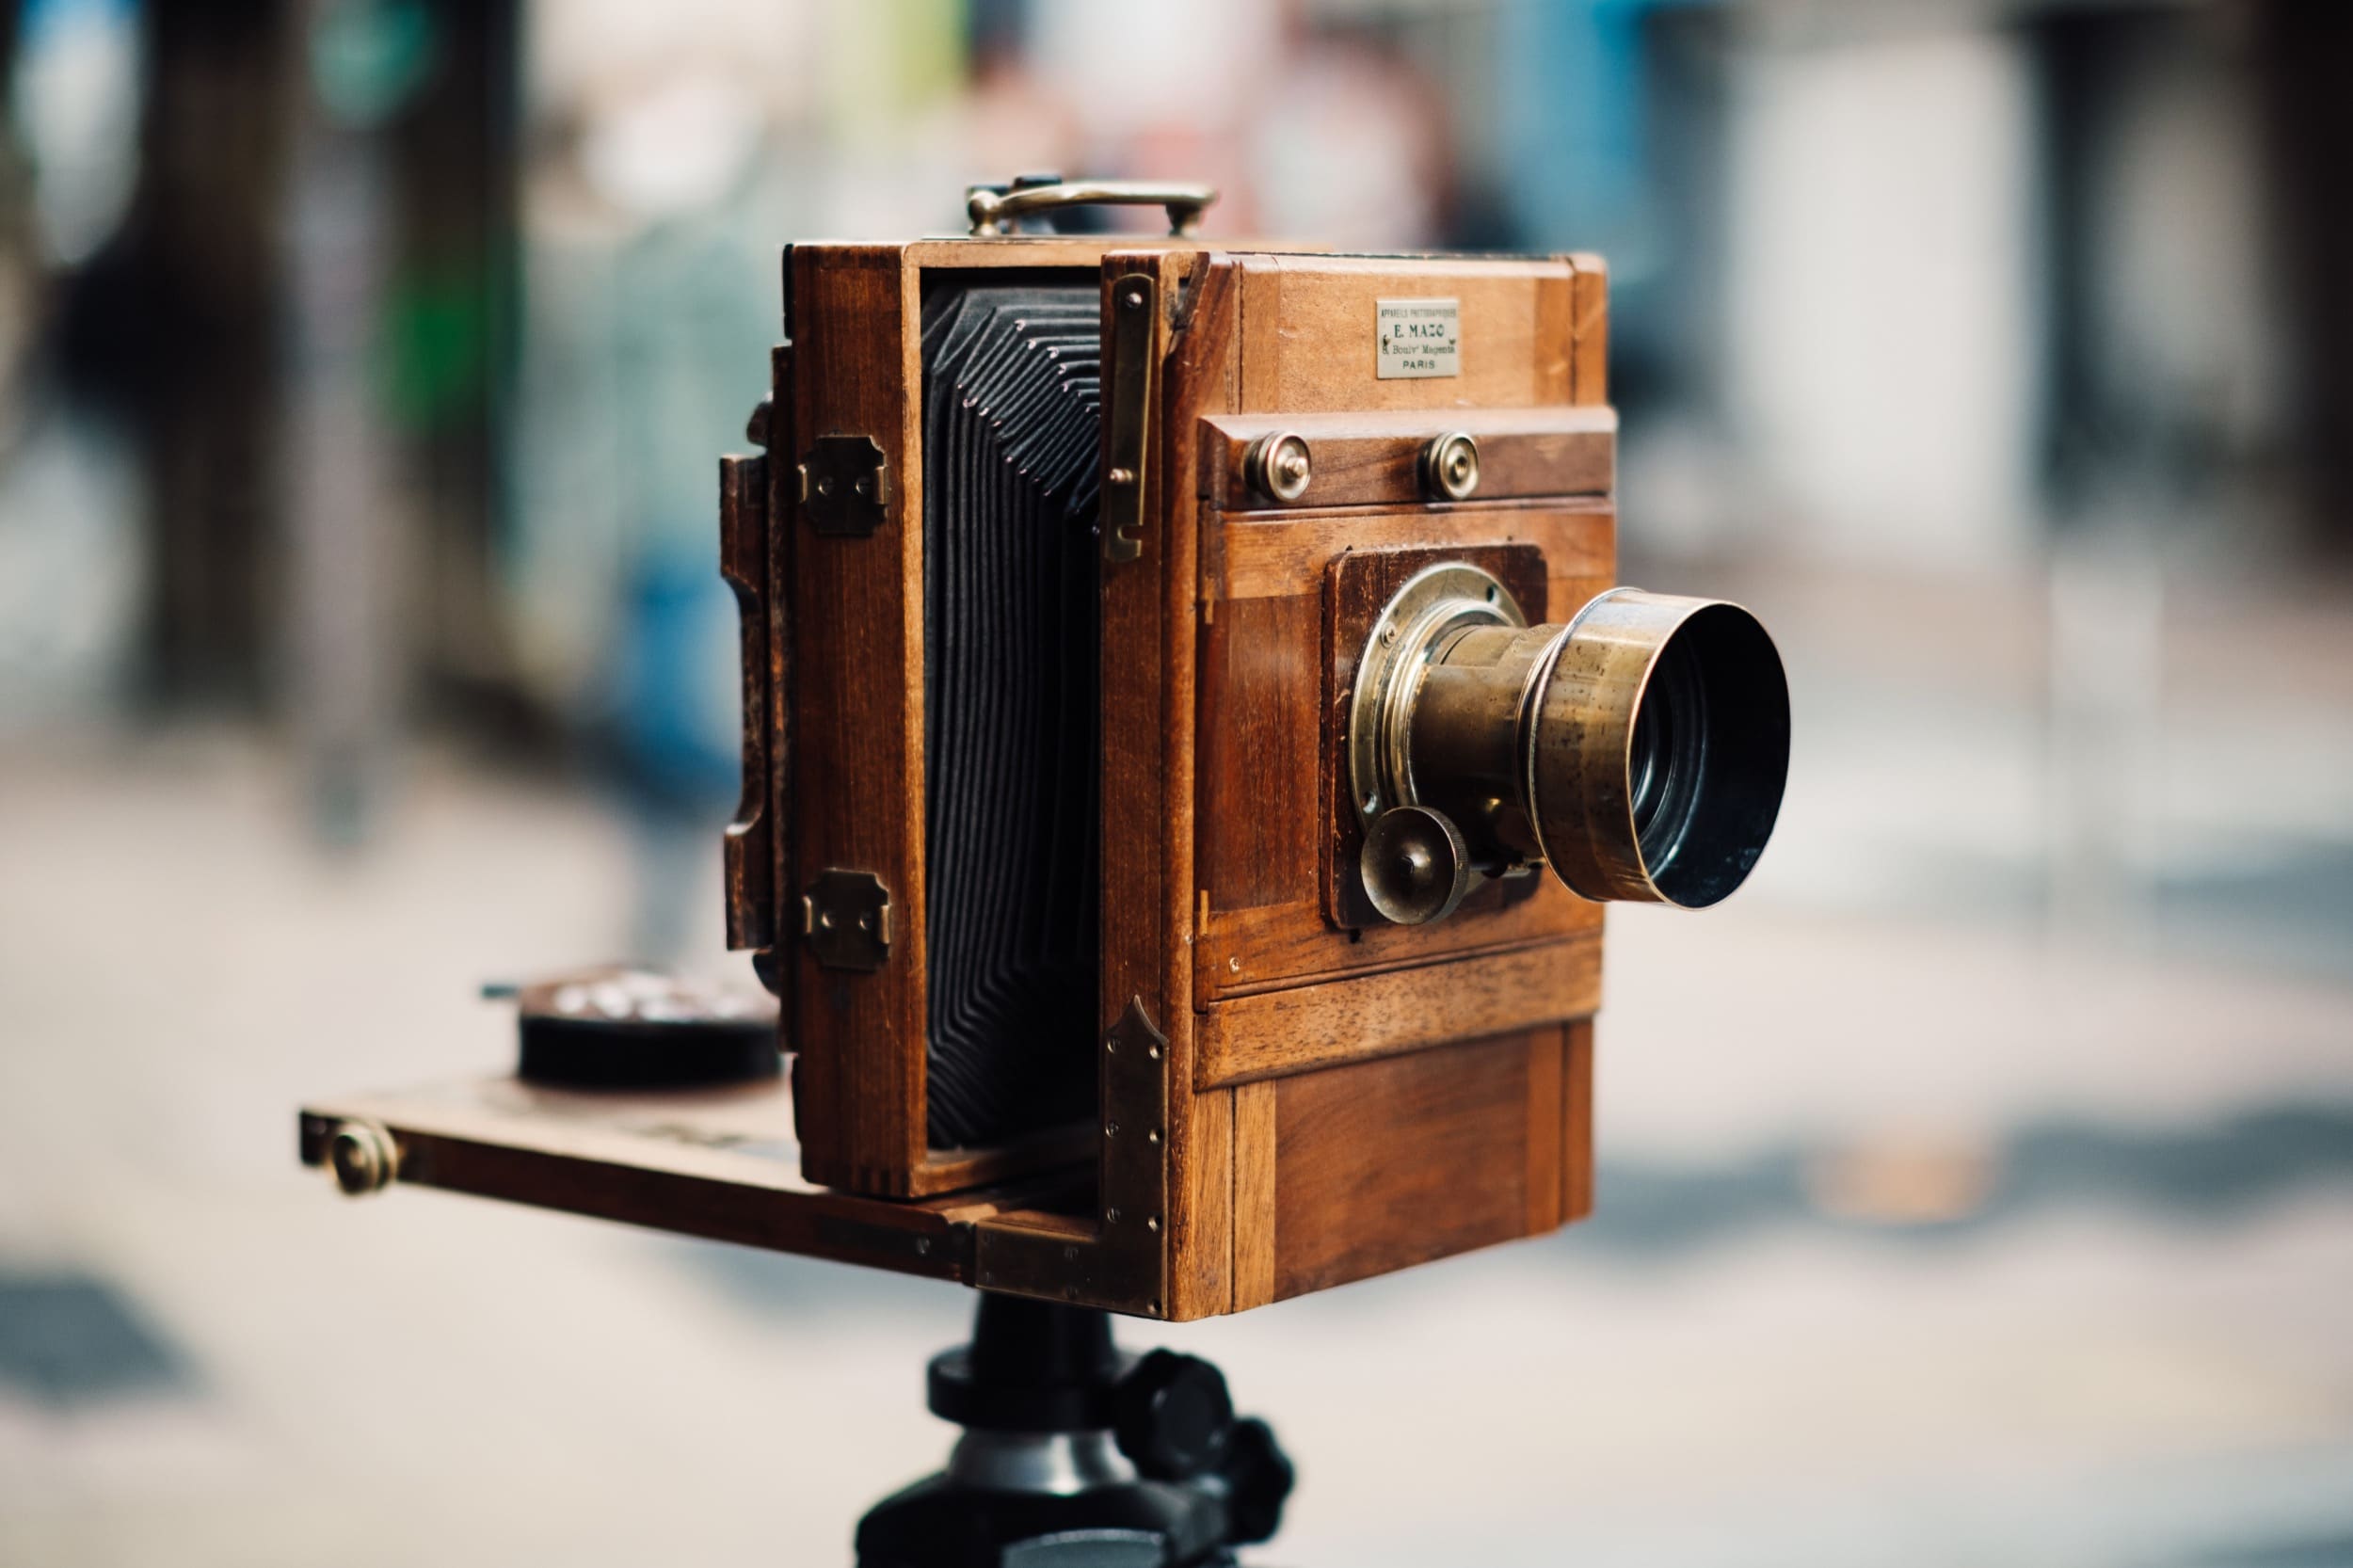 Photo of a super old camera with great background bokeh.